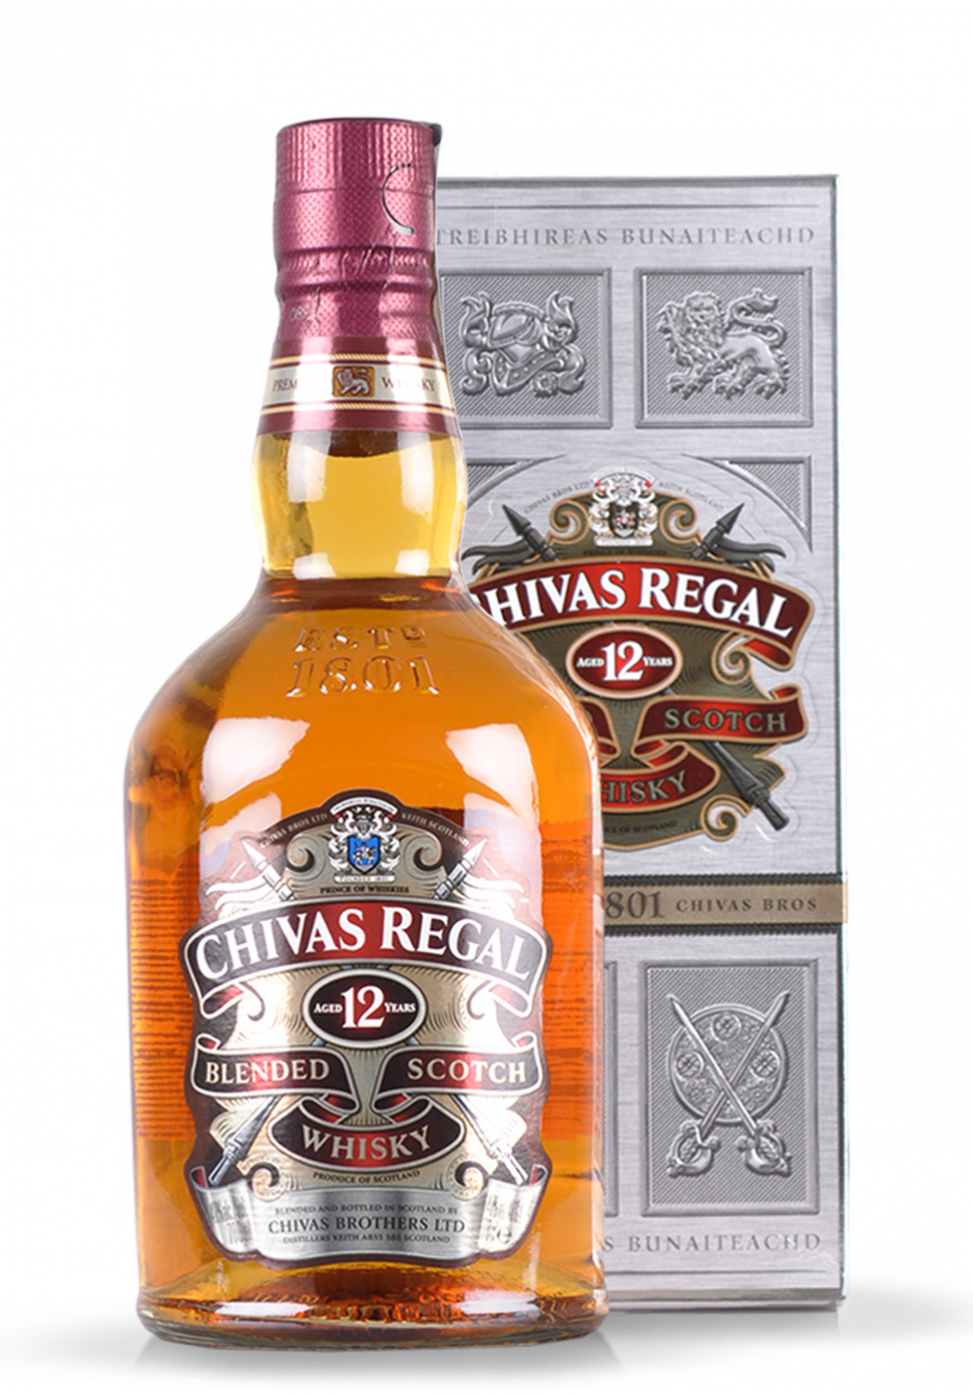 CHIVAS REGAL BLENDED SCOTCH WHISKEY .750 for only $27.99